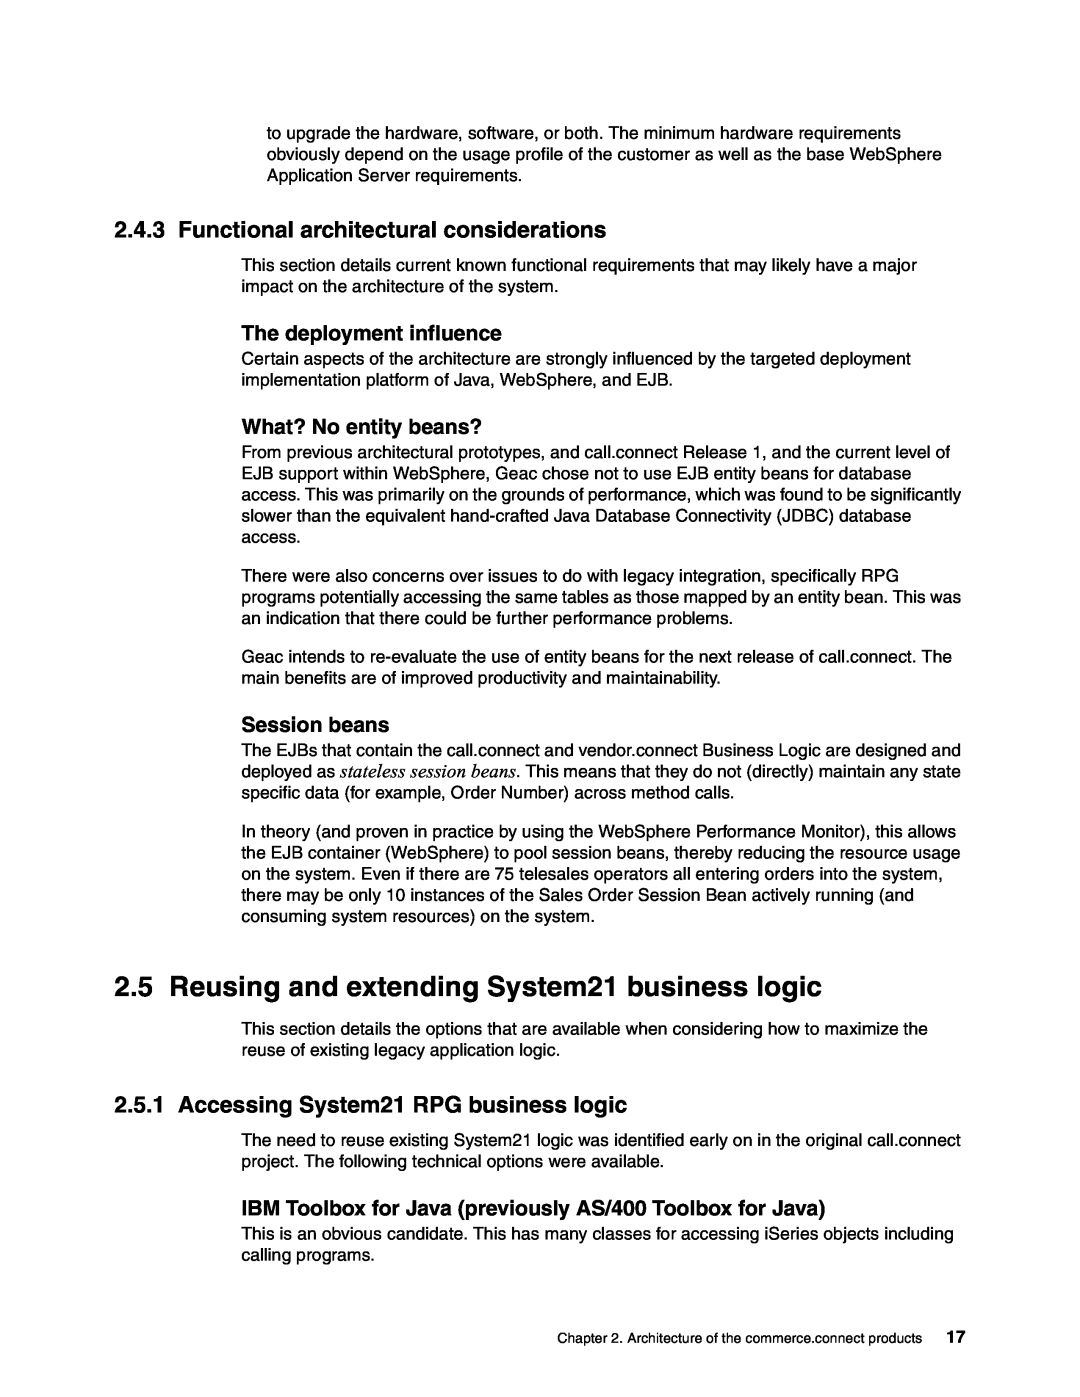 IBM SG24-6526-00 Reusing and extending System21 business logic, Functional architectural considerations, Session beans 